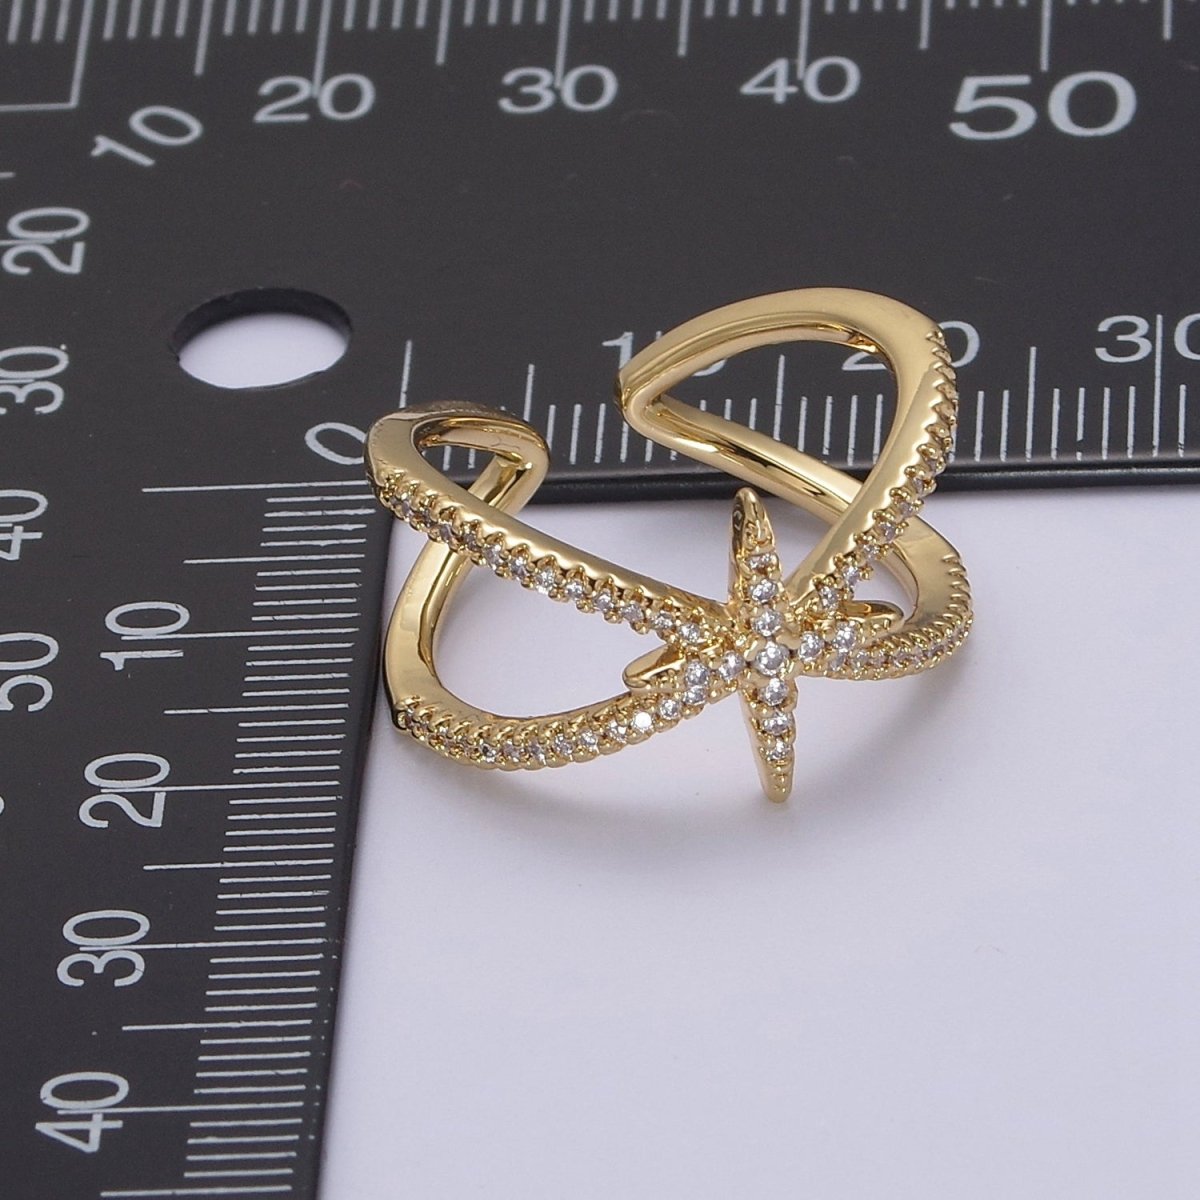 Criss Cross Star Ring, CZ Ring, Statement Ring Silver, X rings, Crossover Ring Open Adjustable 14k Gold Filled S-449 S-450 - DLUXCA